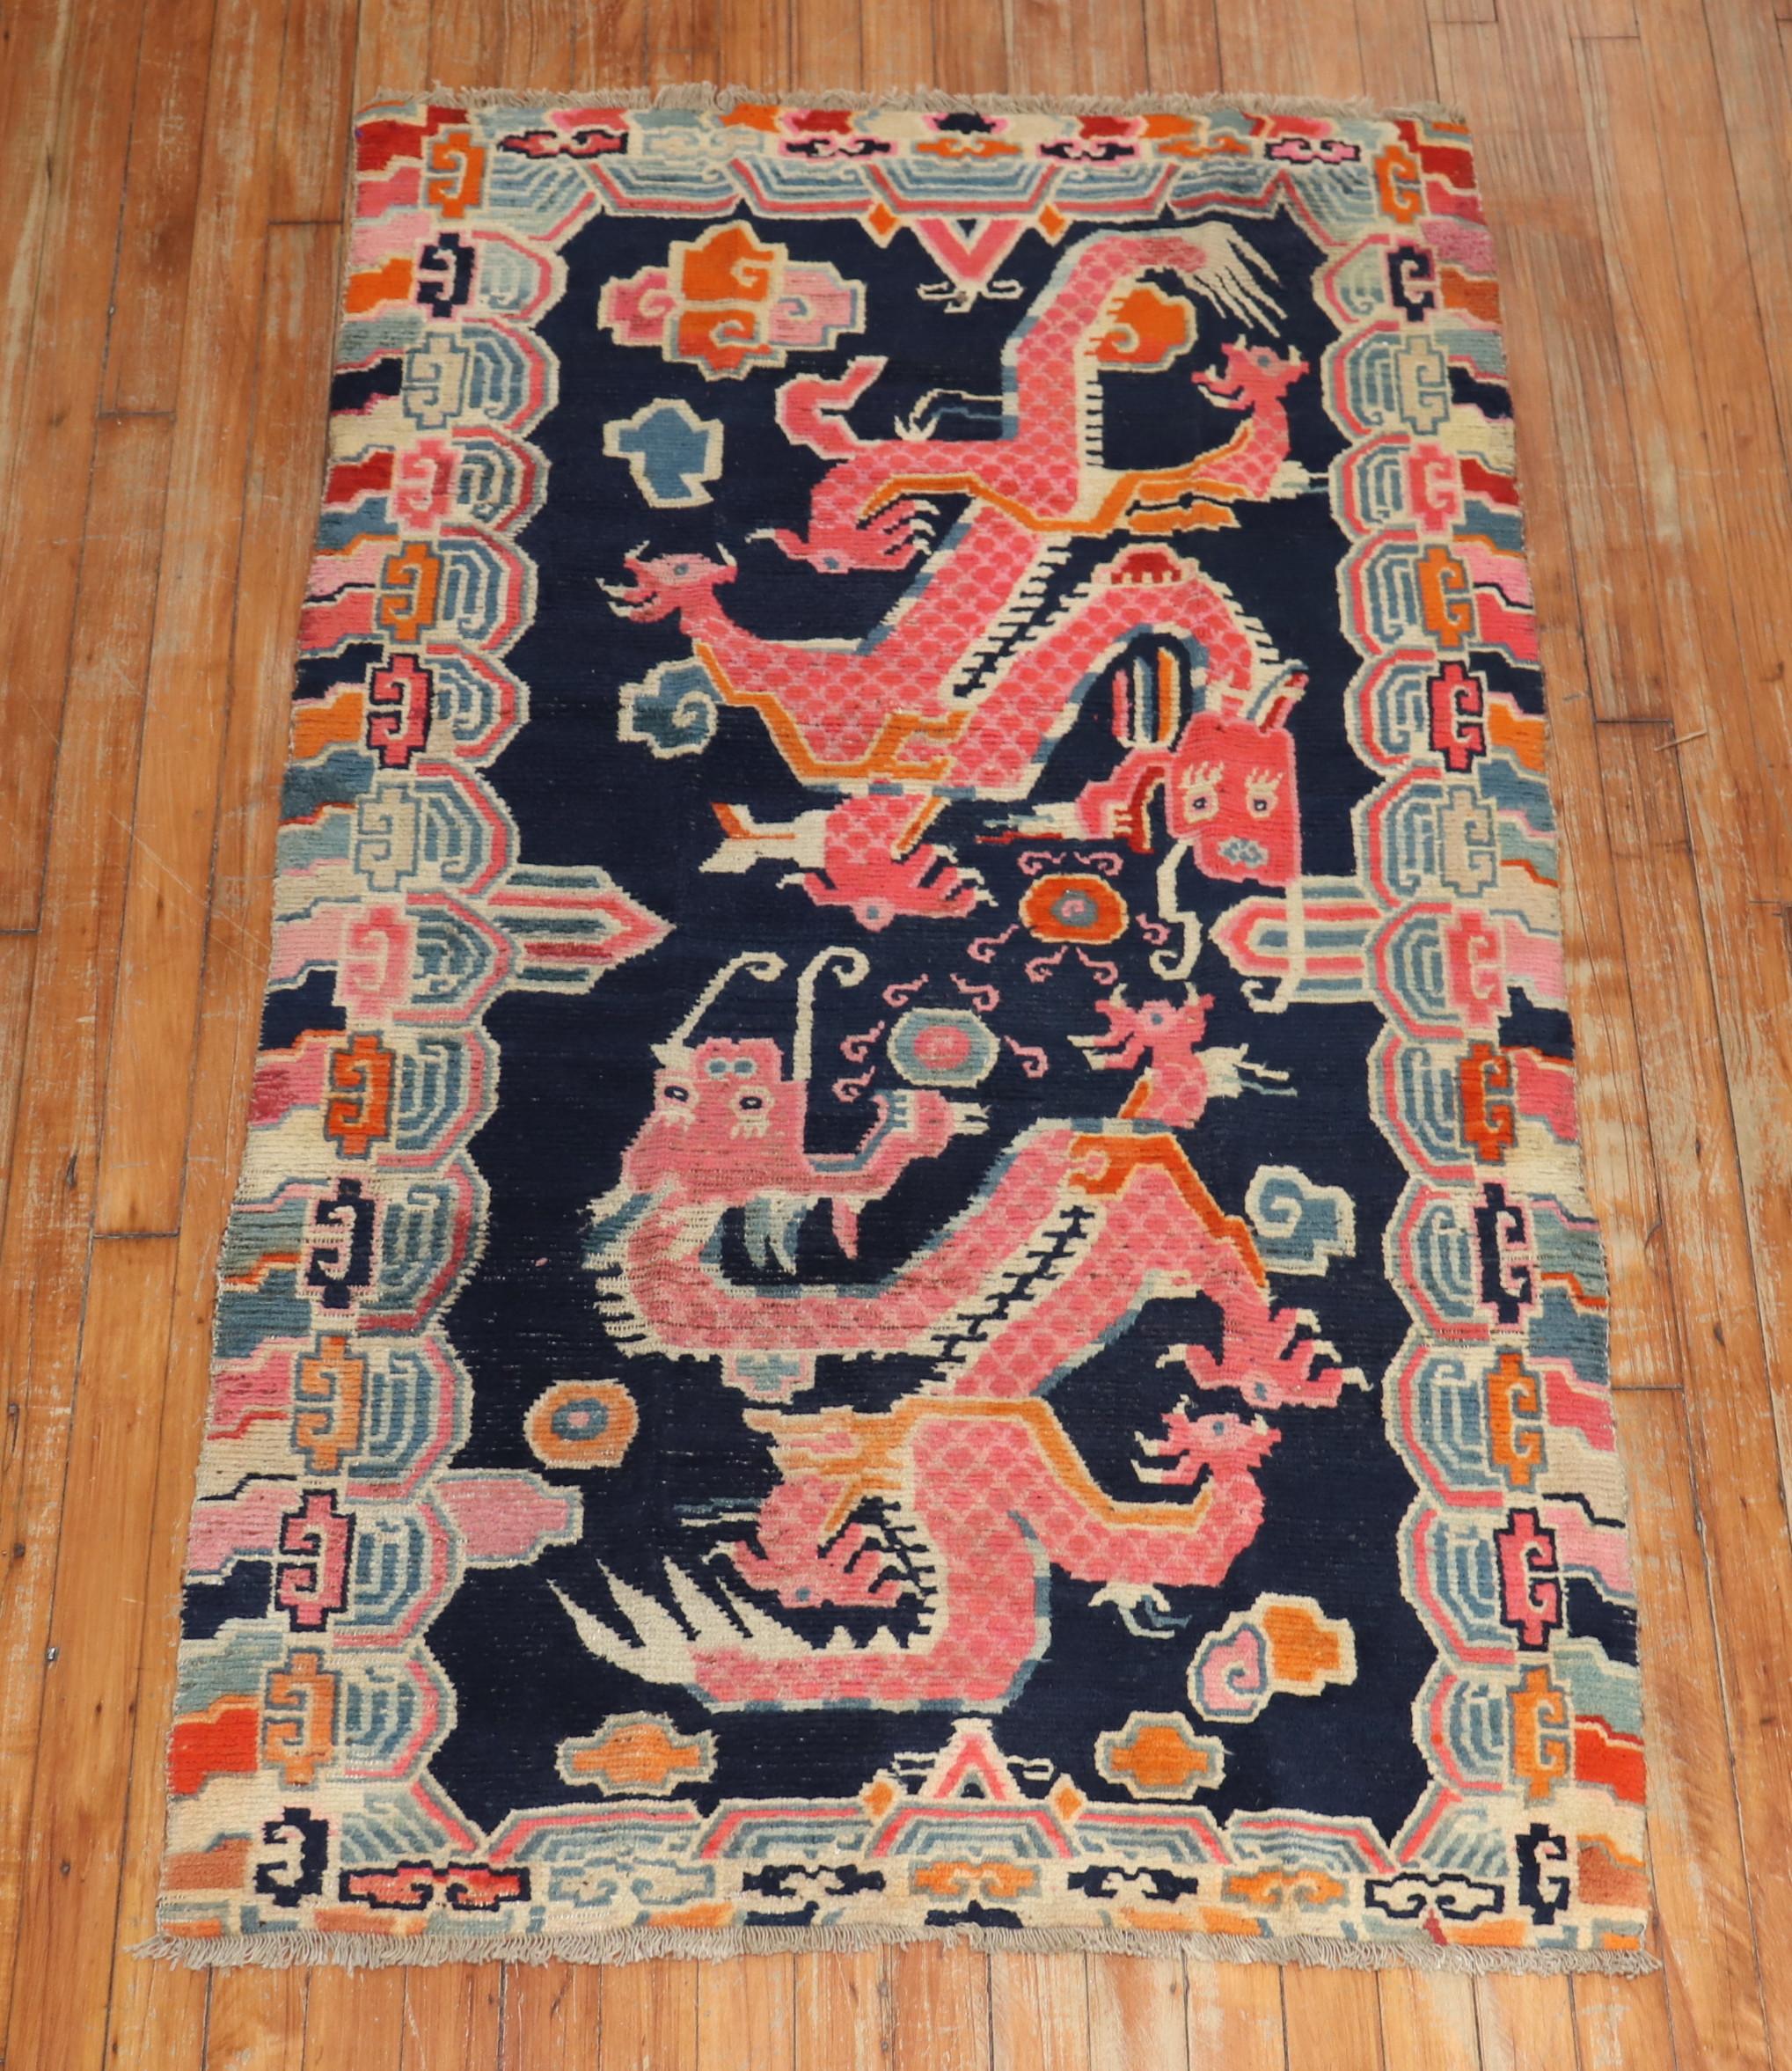 A mid-20th century Chinese rug with 2 large dragons floating on a navy blue ground.

Measures: 3'1' x 5'1